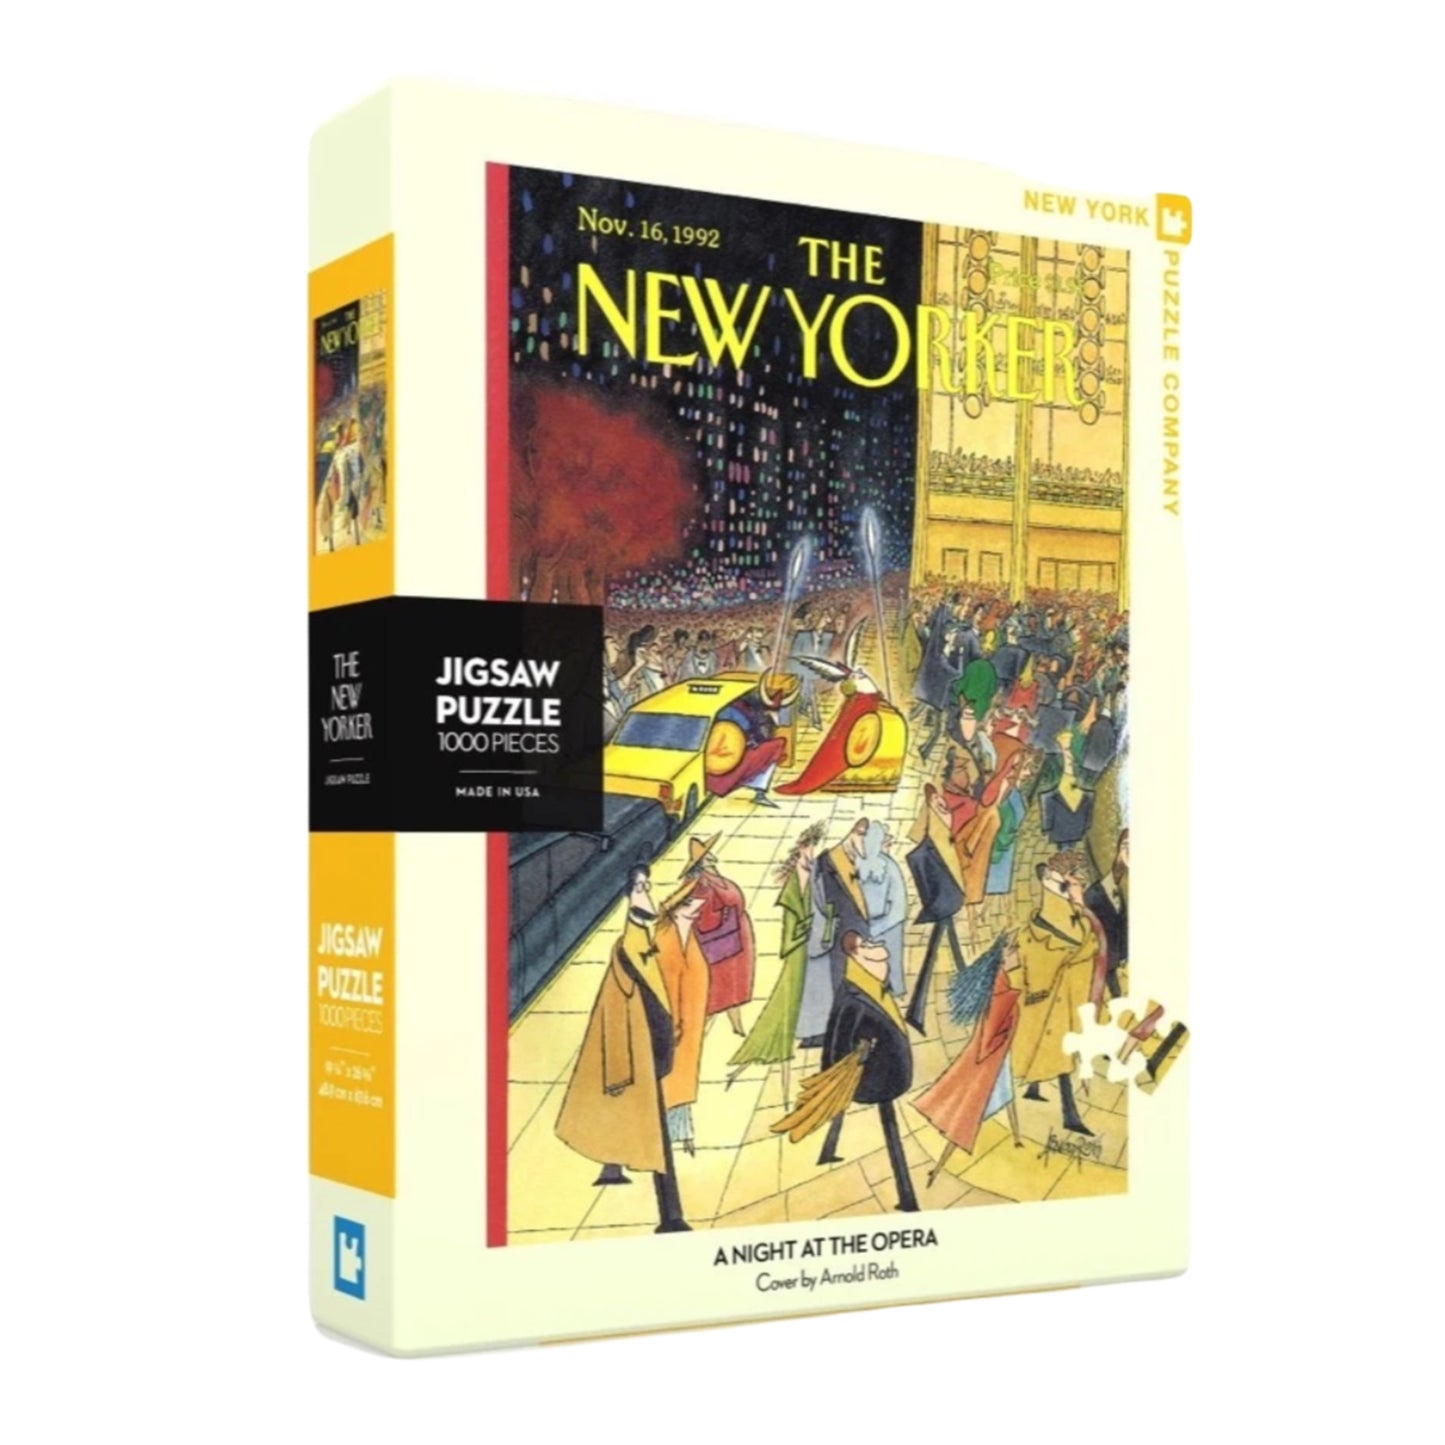 The New Yorker, A Night at the Opera Puzzle